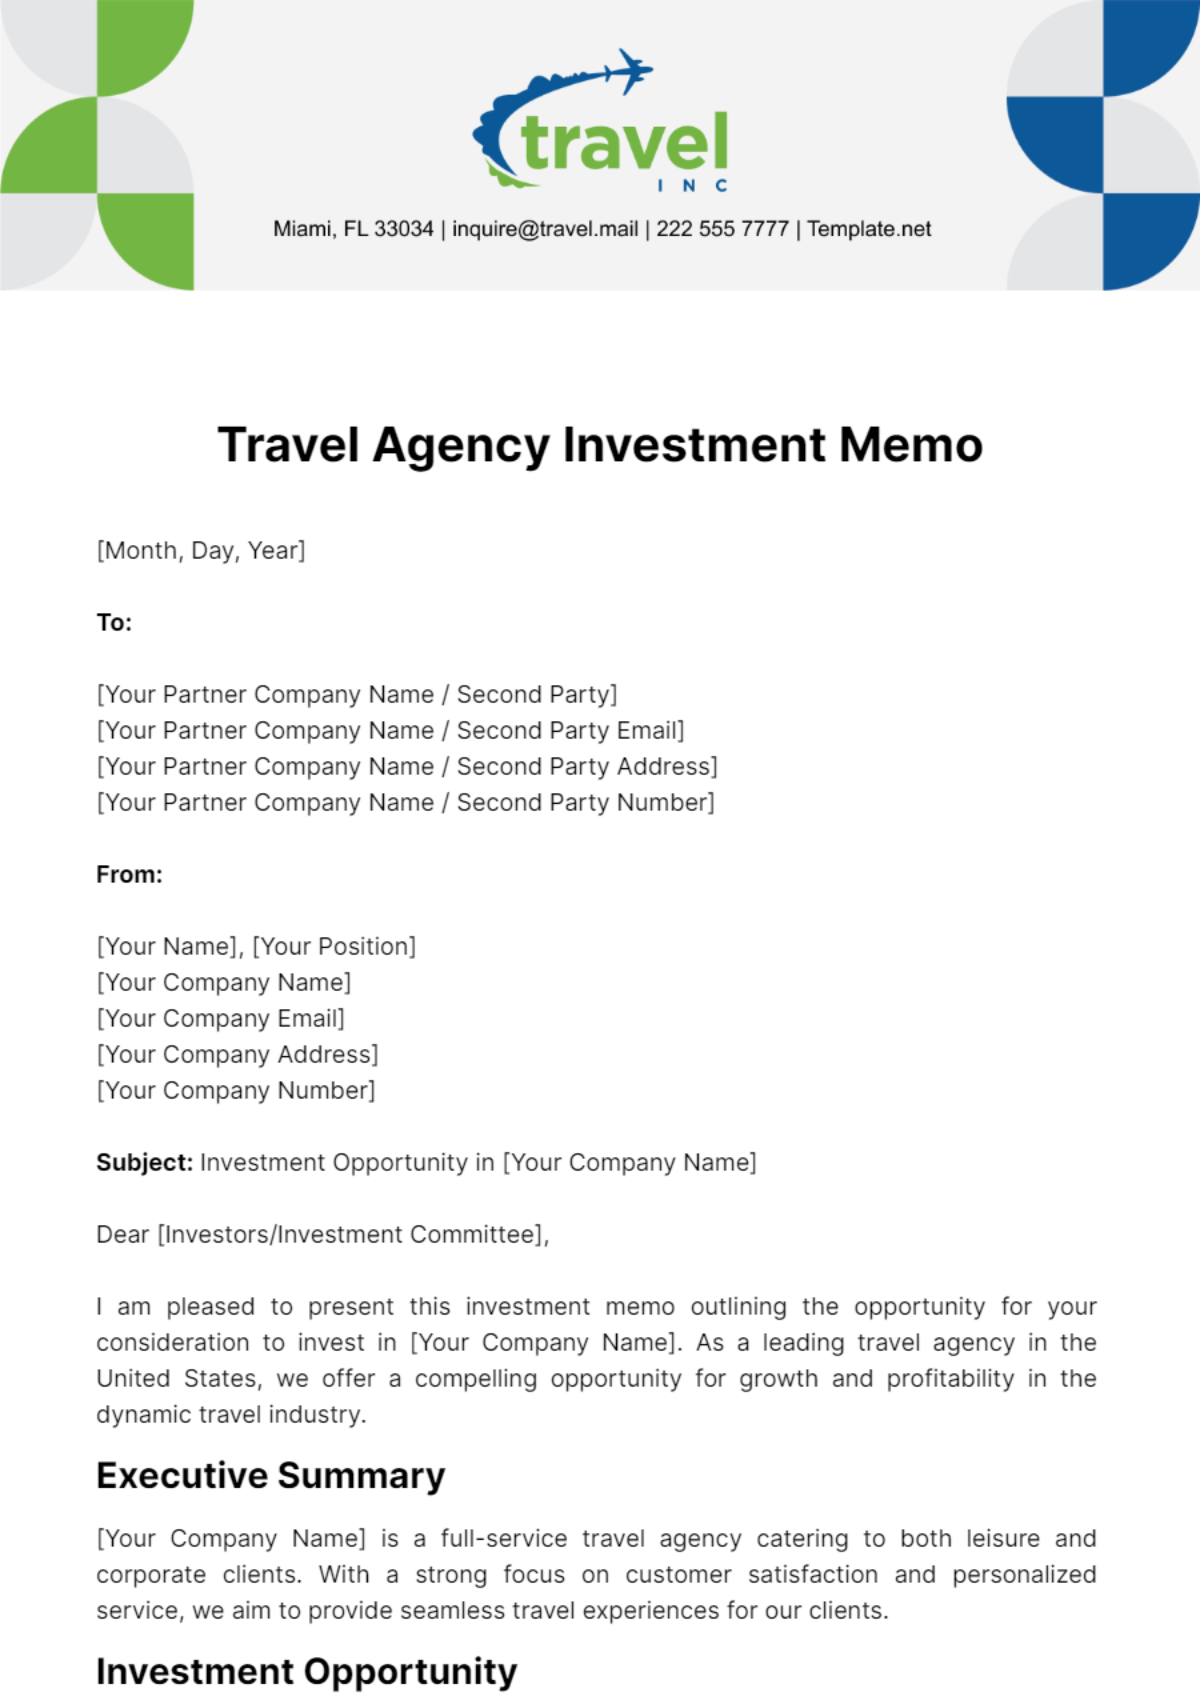 Travel Agency Investment Memo Template